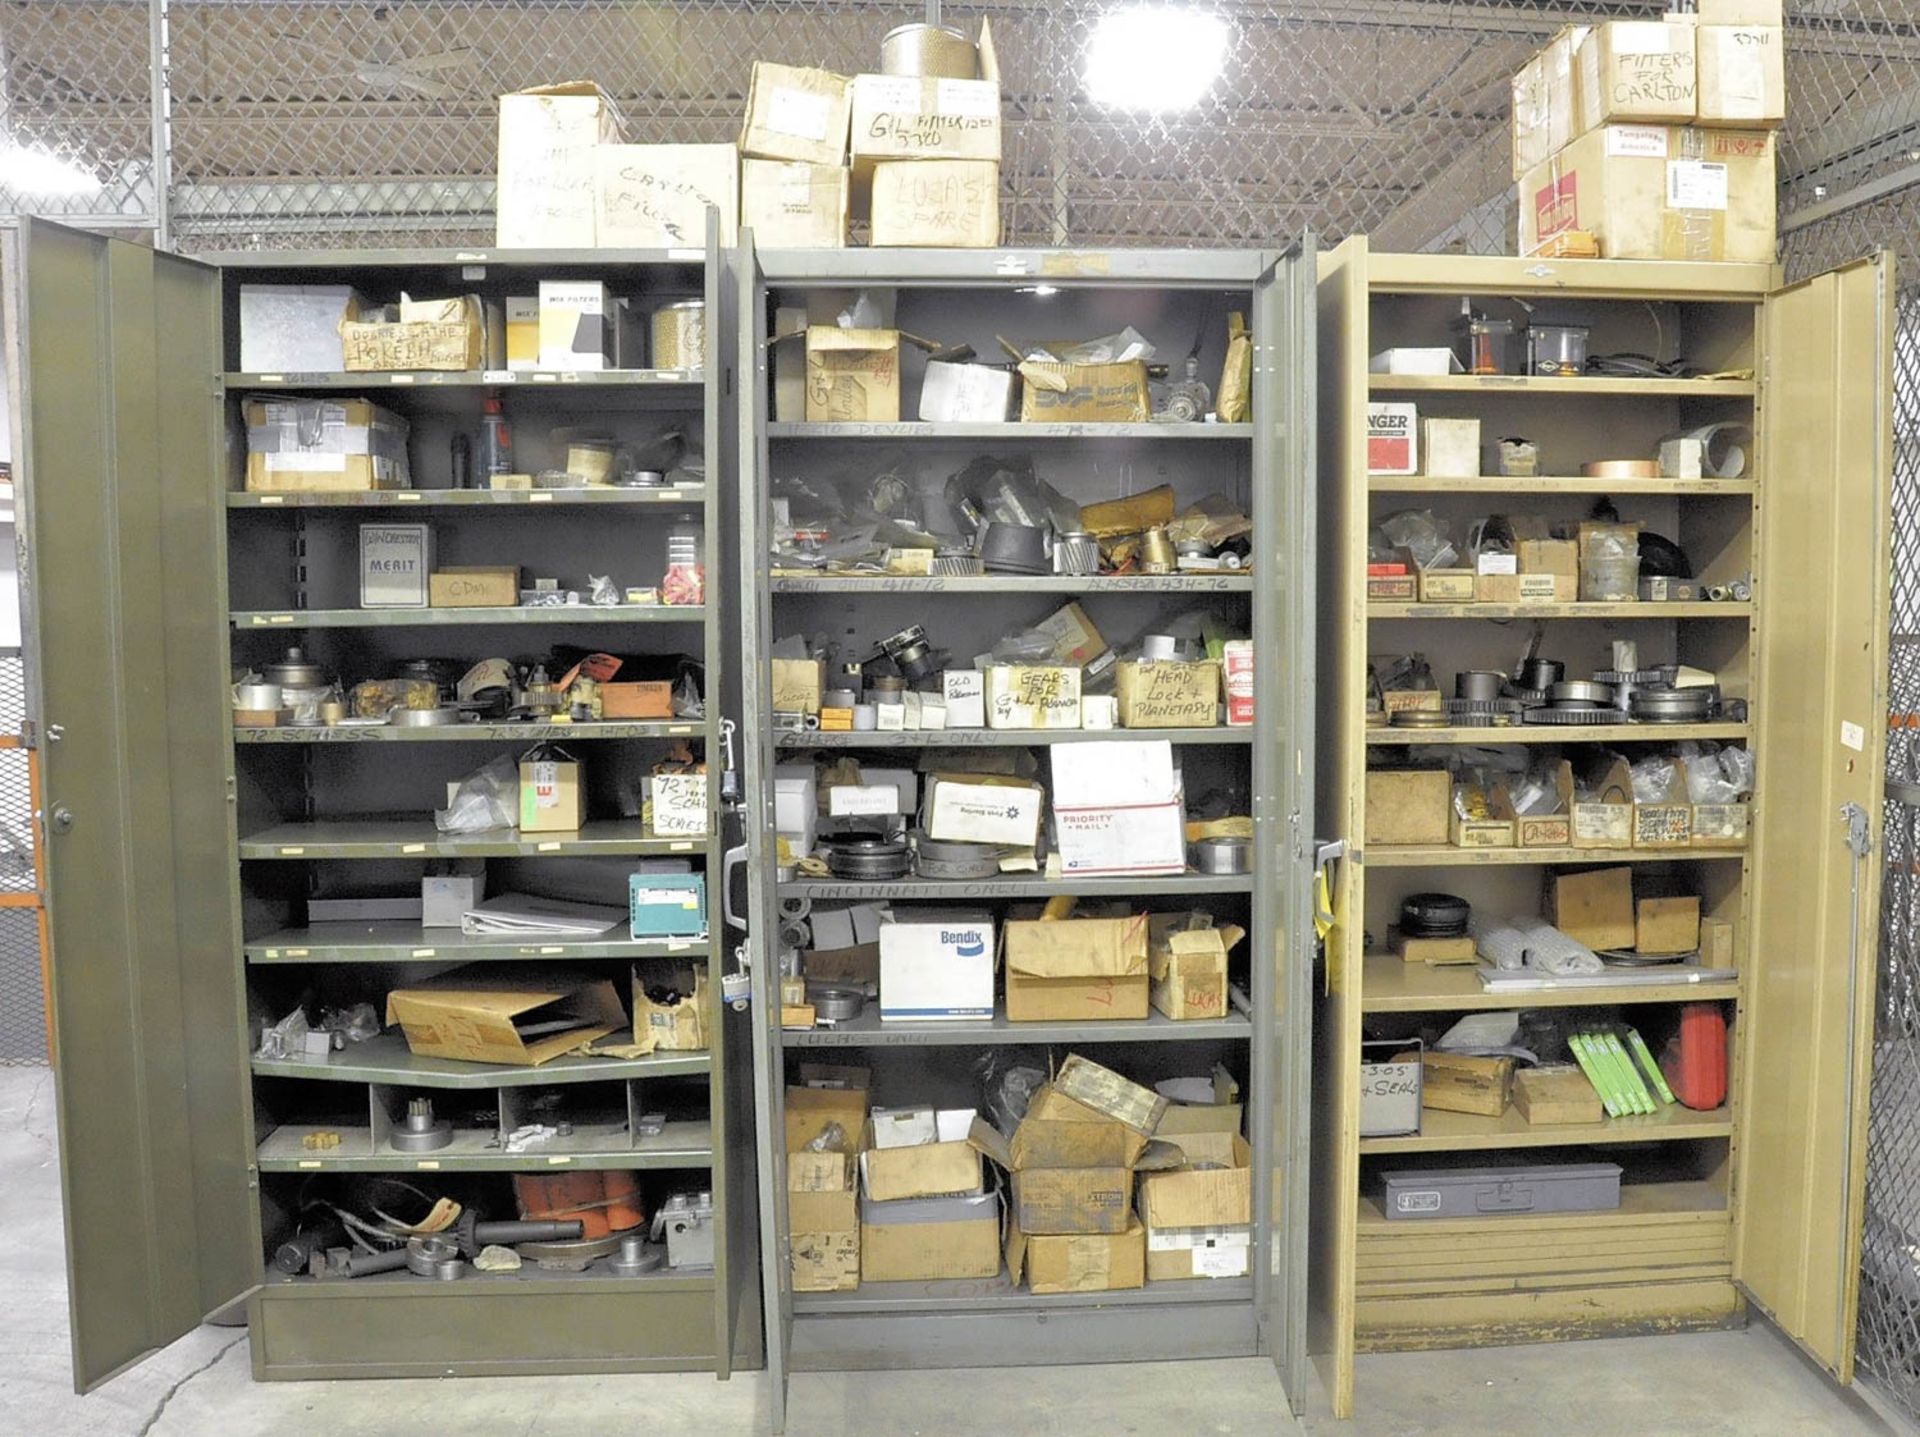 Lot of Spare Machine Parts for All Large Machines in the Shop in (3) Cabinets (Mezzanine)